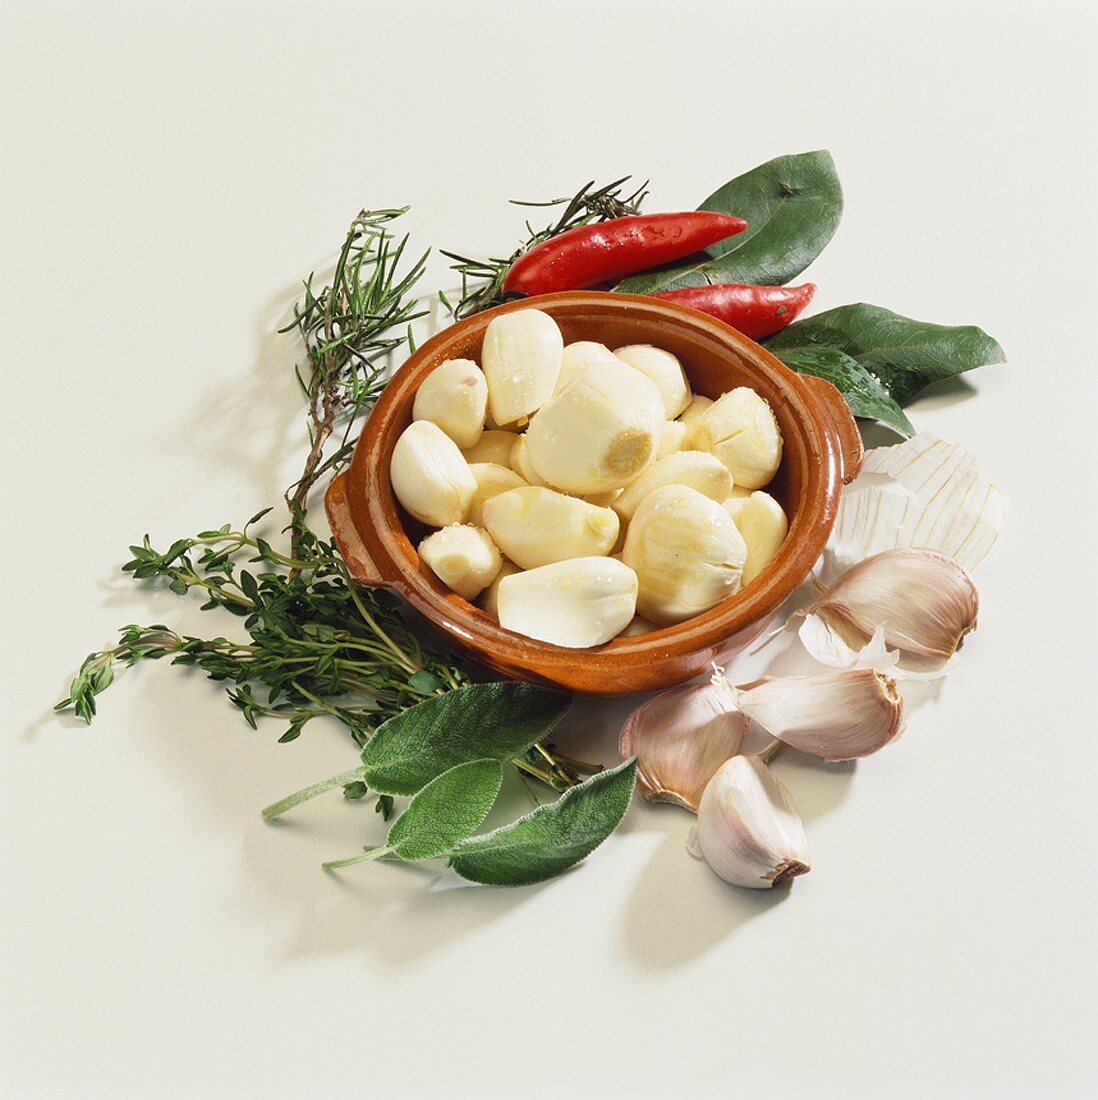 Garlic cloves, fresh herbs and two chillies